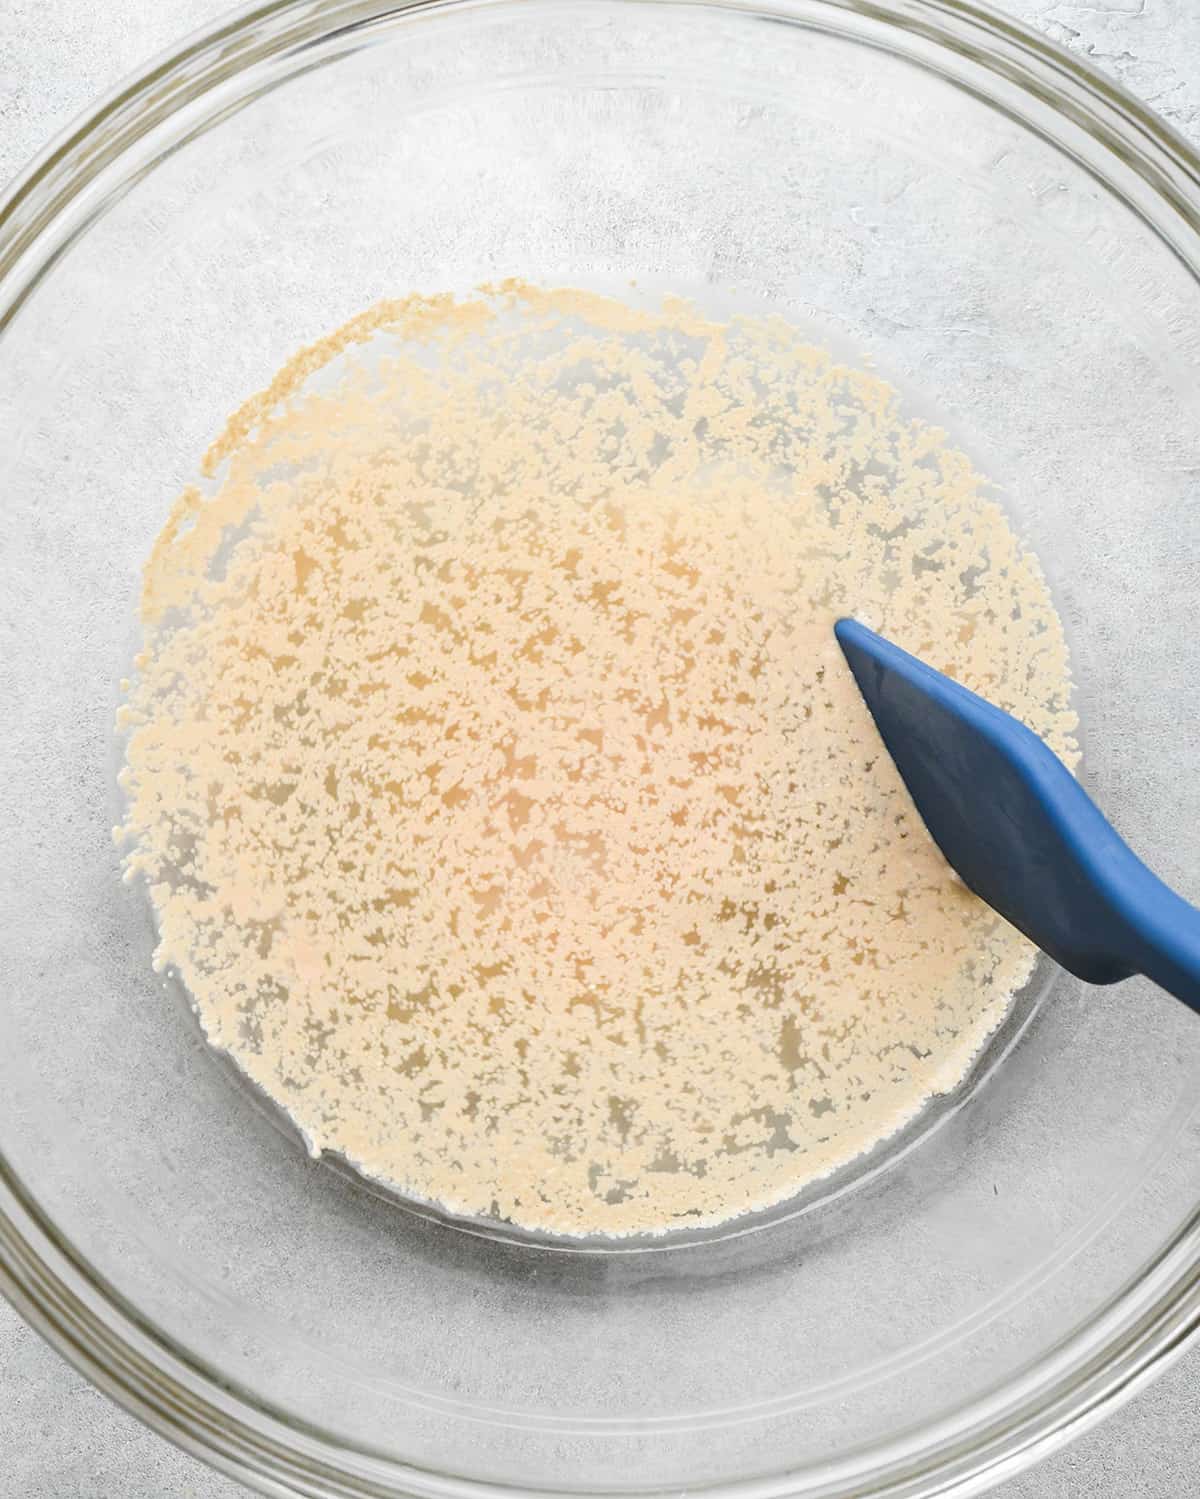 How to Make Pizza -proofing yeast for dough